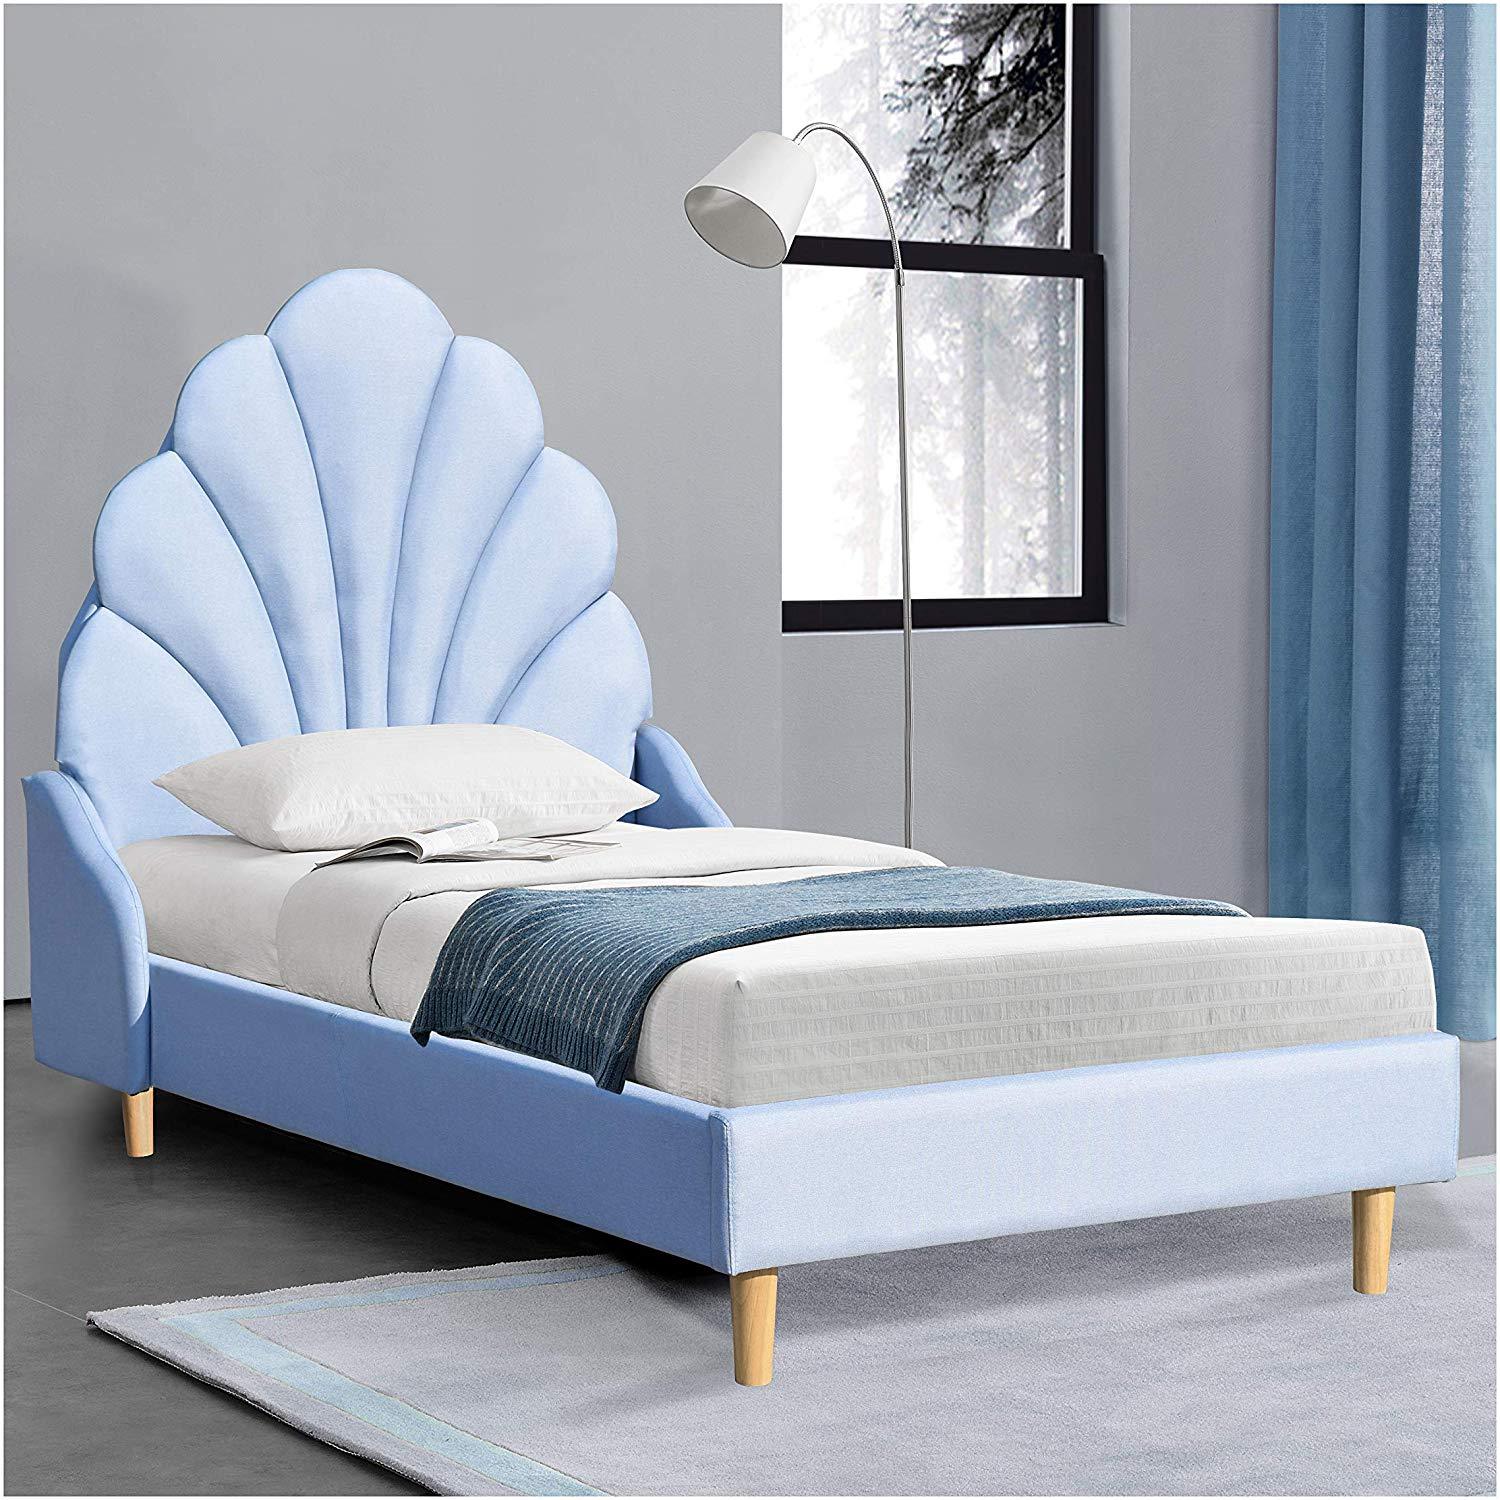 Cherry Tree Furniture ARIEL Blue Linen Fabric Upholstered Bed with Scalloped Headboard 4FT Small Double